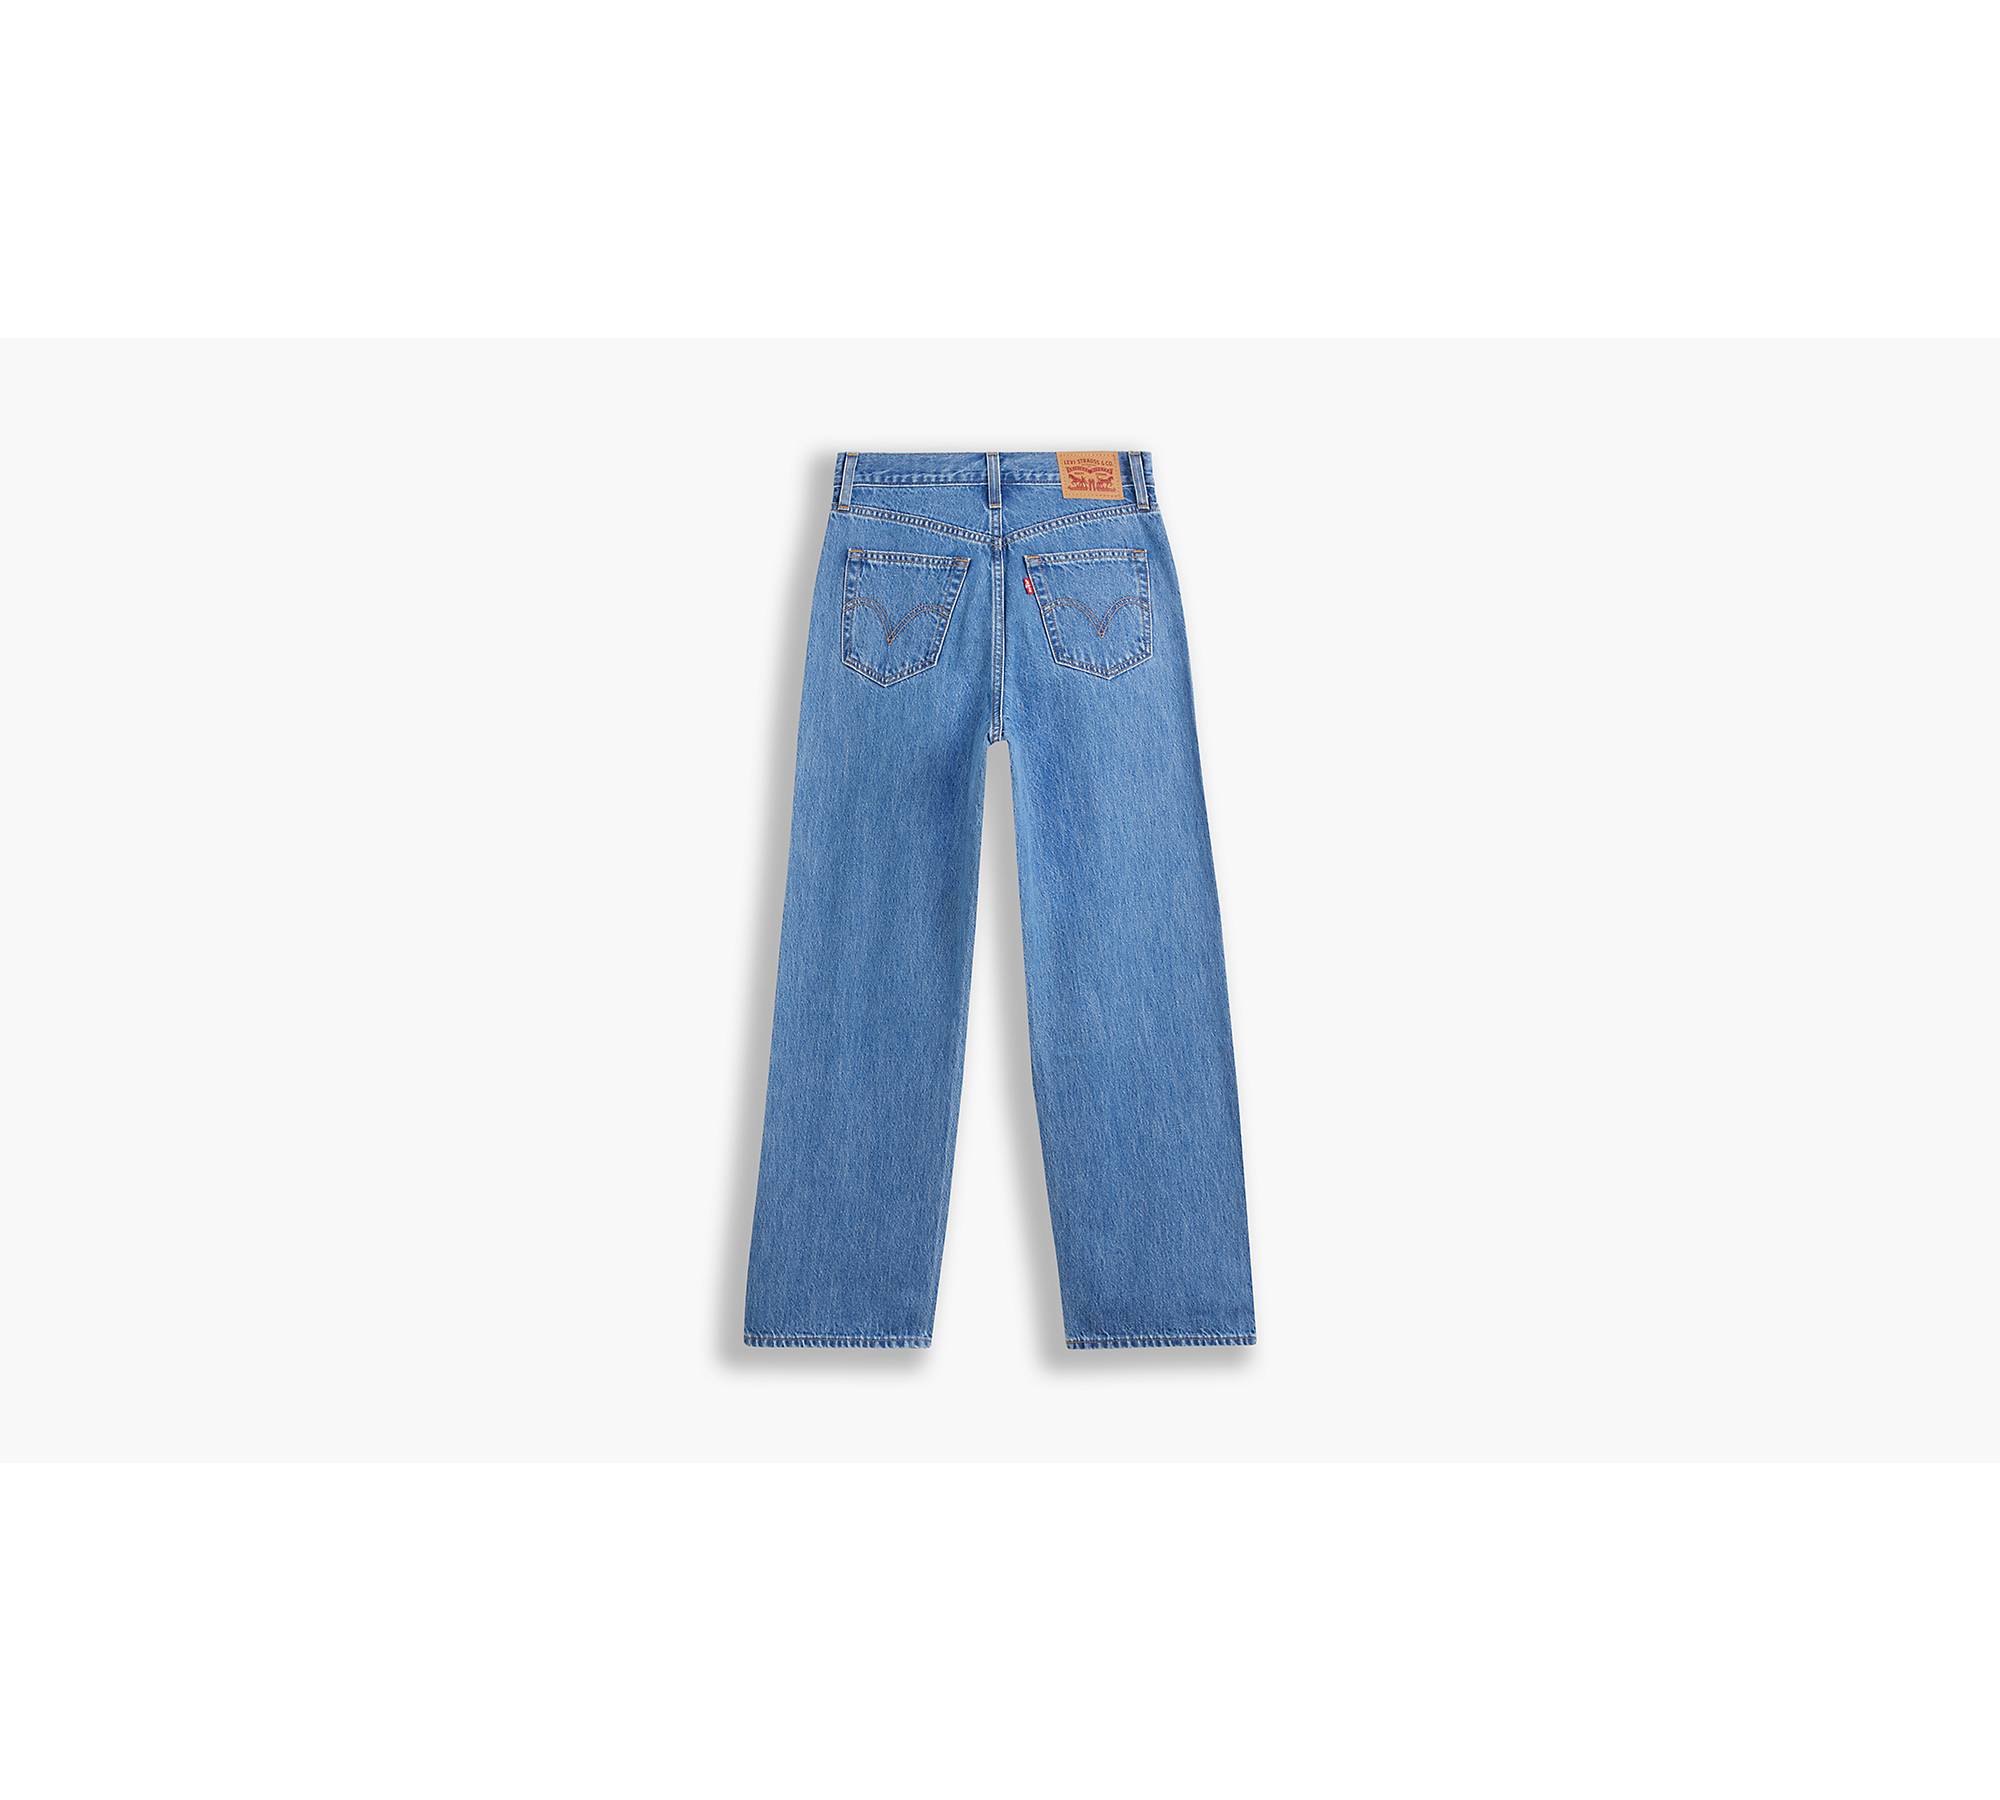 Levi's high waisted straight jeans in mid wash blue